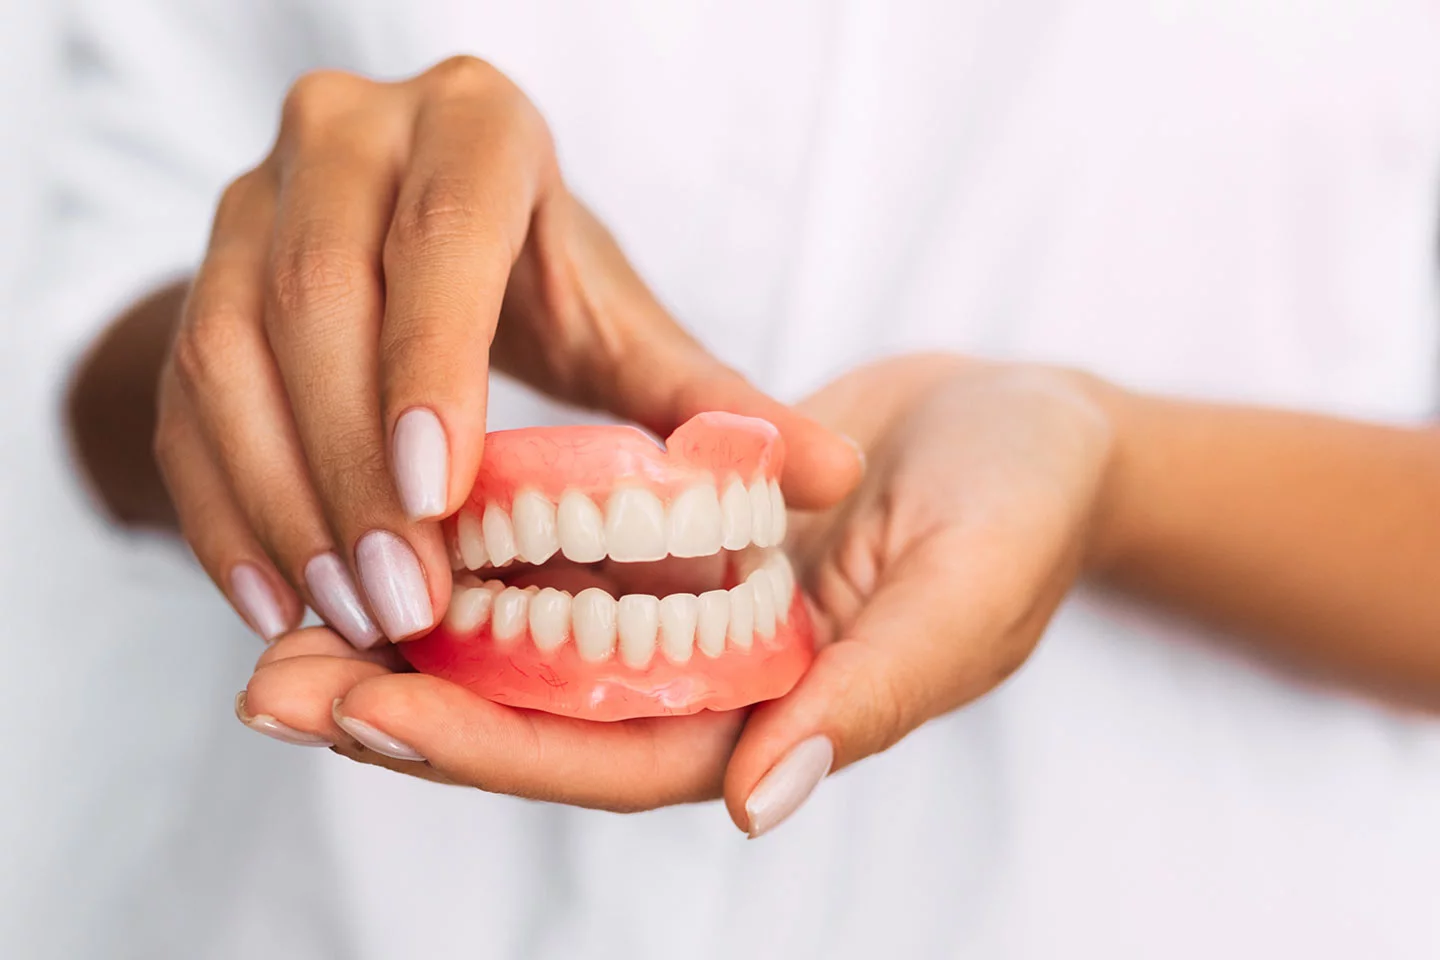 Adjusting to New Dentures: The Best Methods for Your New Smile